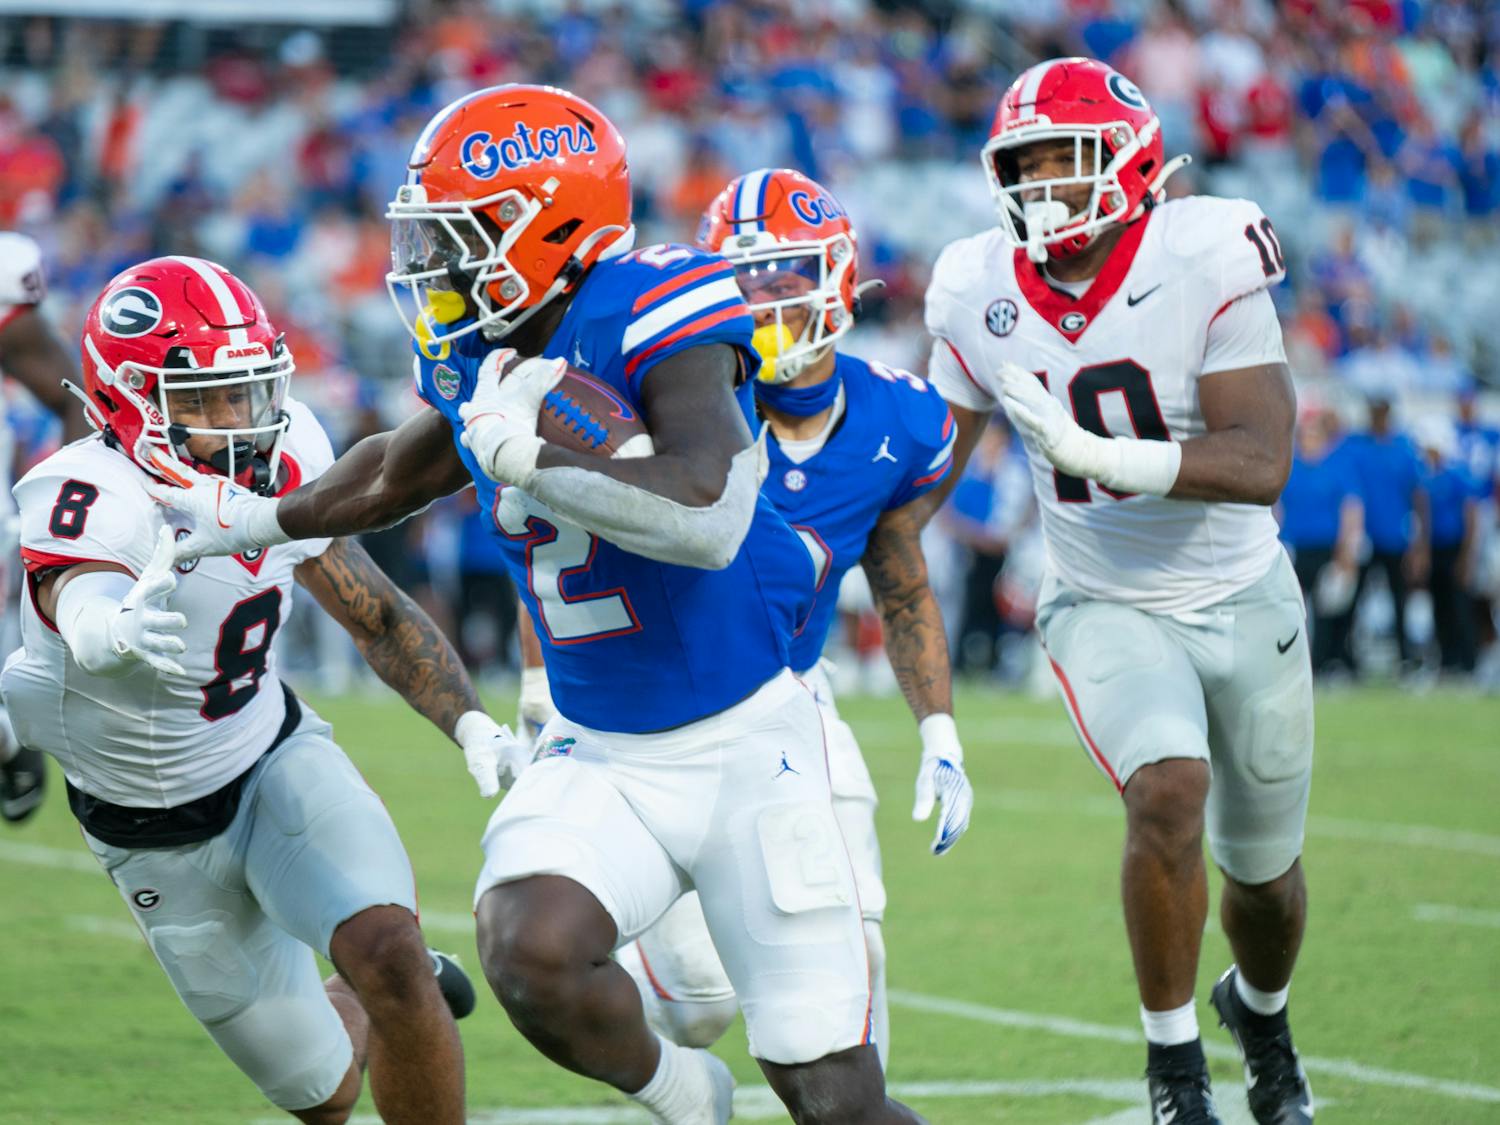 Running back Montrell Johnson rumbles through the defense in the Gators’ 43-20 loss against the Georgia Bulldogs on Saturday, Oct. 28, 2023.